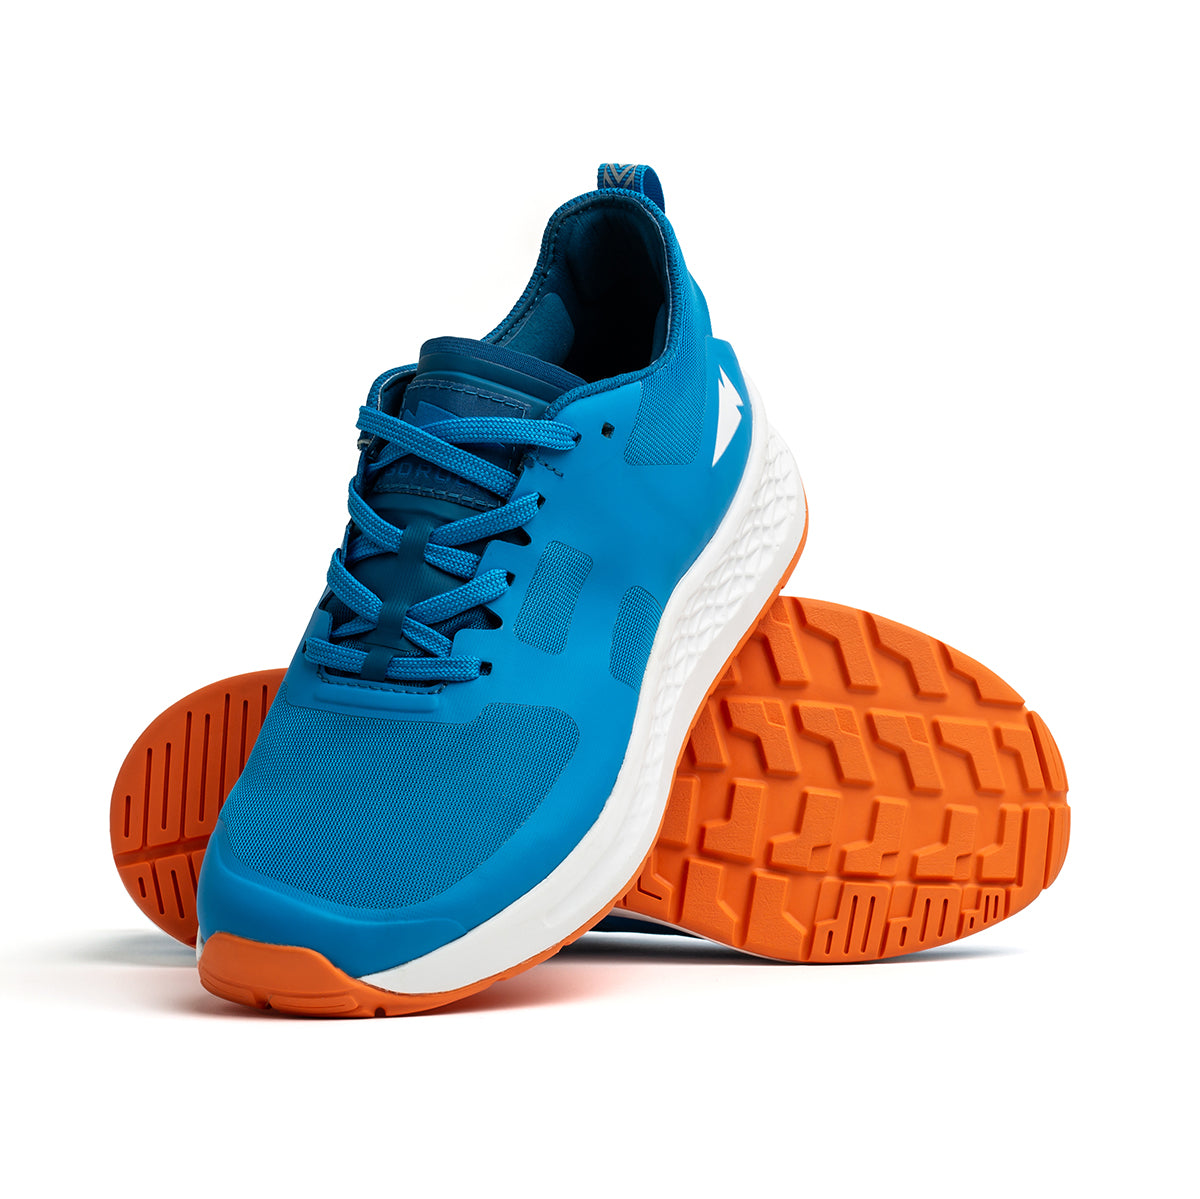 Men's Rough Runners - Electric Blue